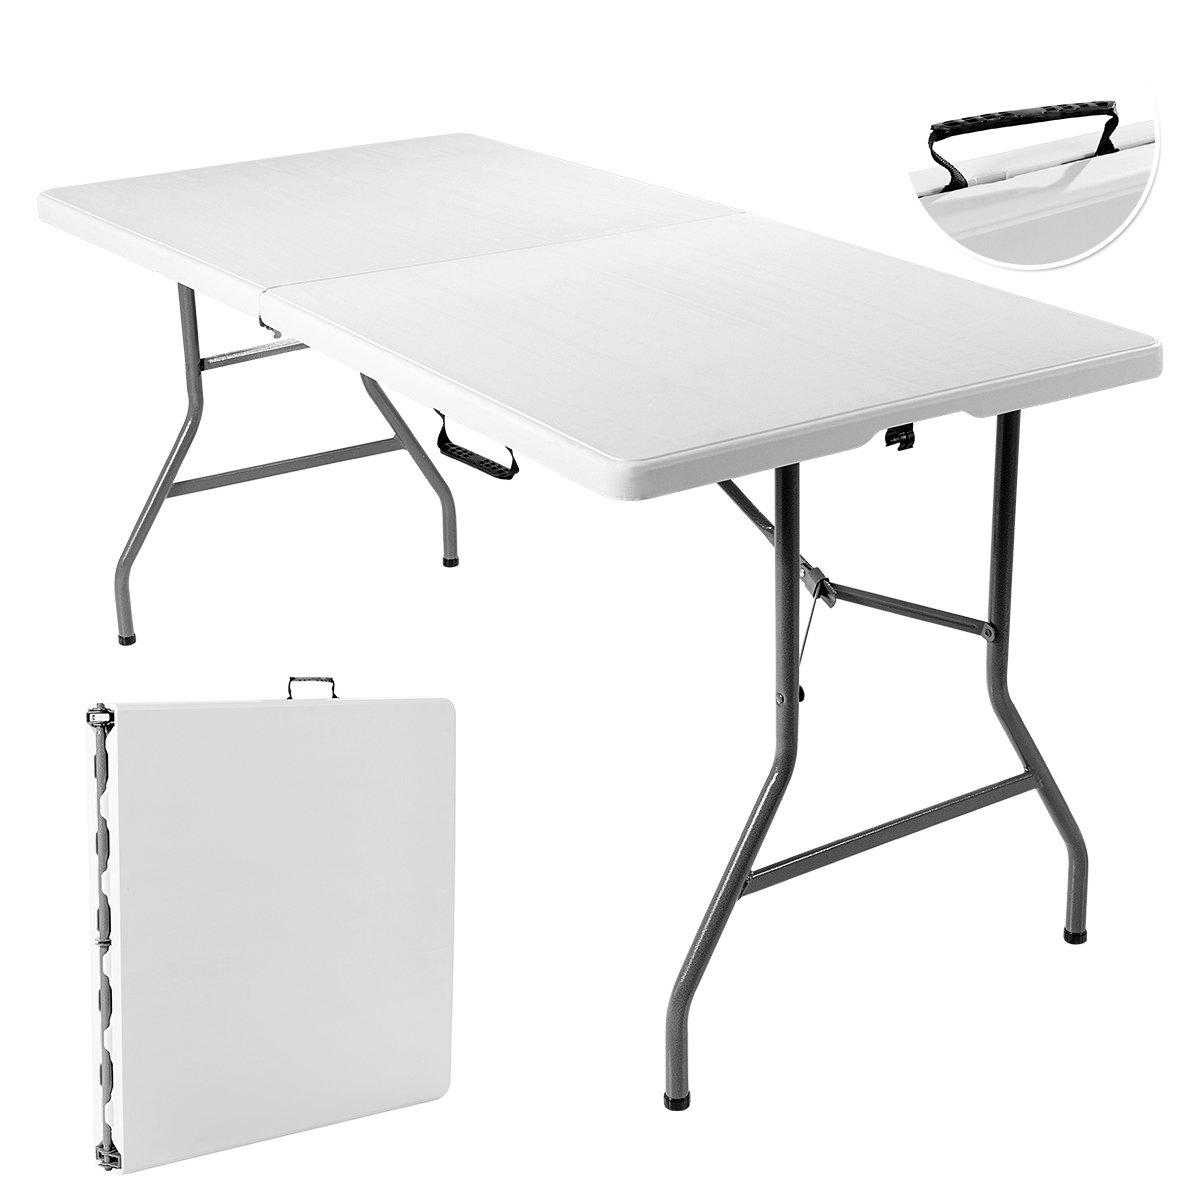 Folding Table Camping Table Picnic Table with Metal Frame & Carrying Handle